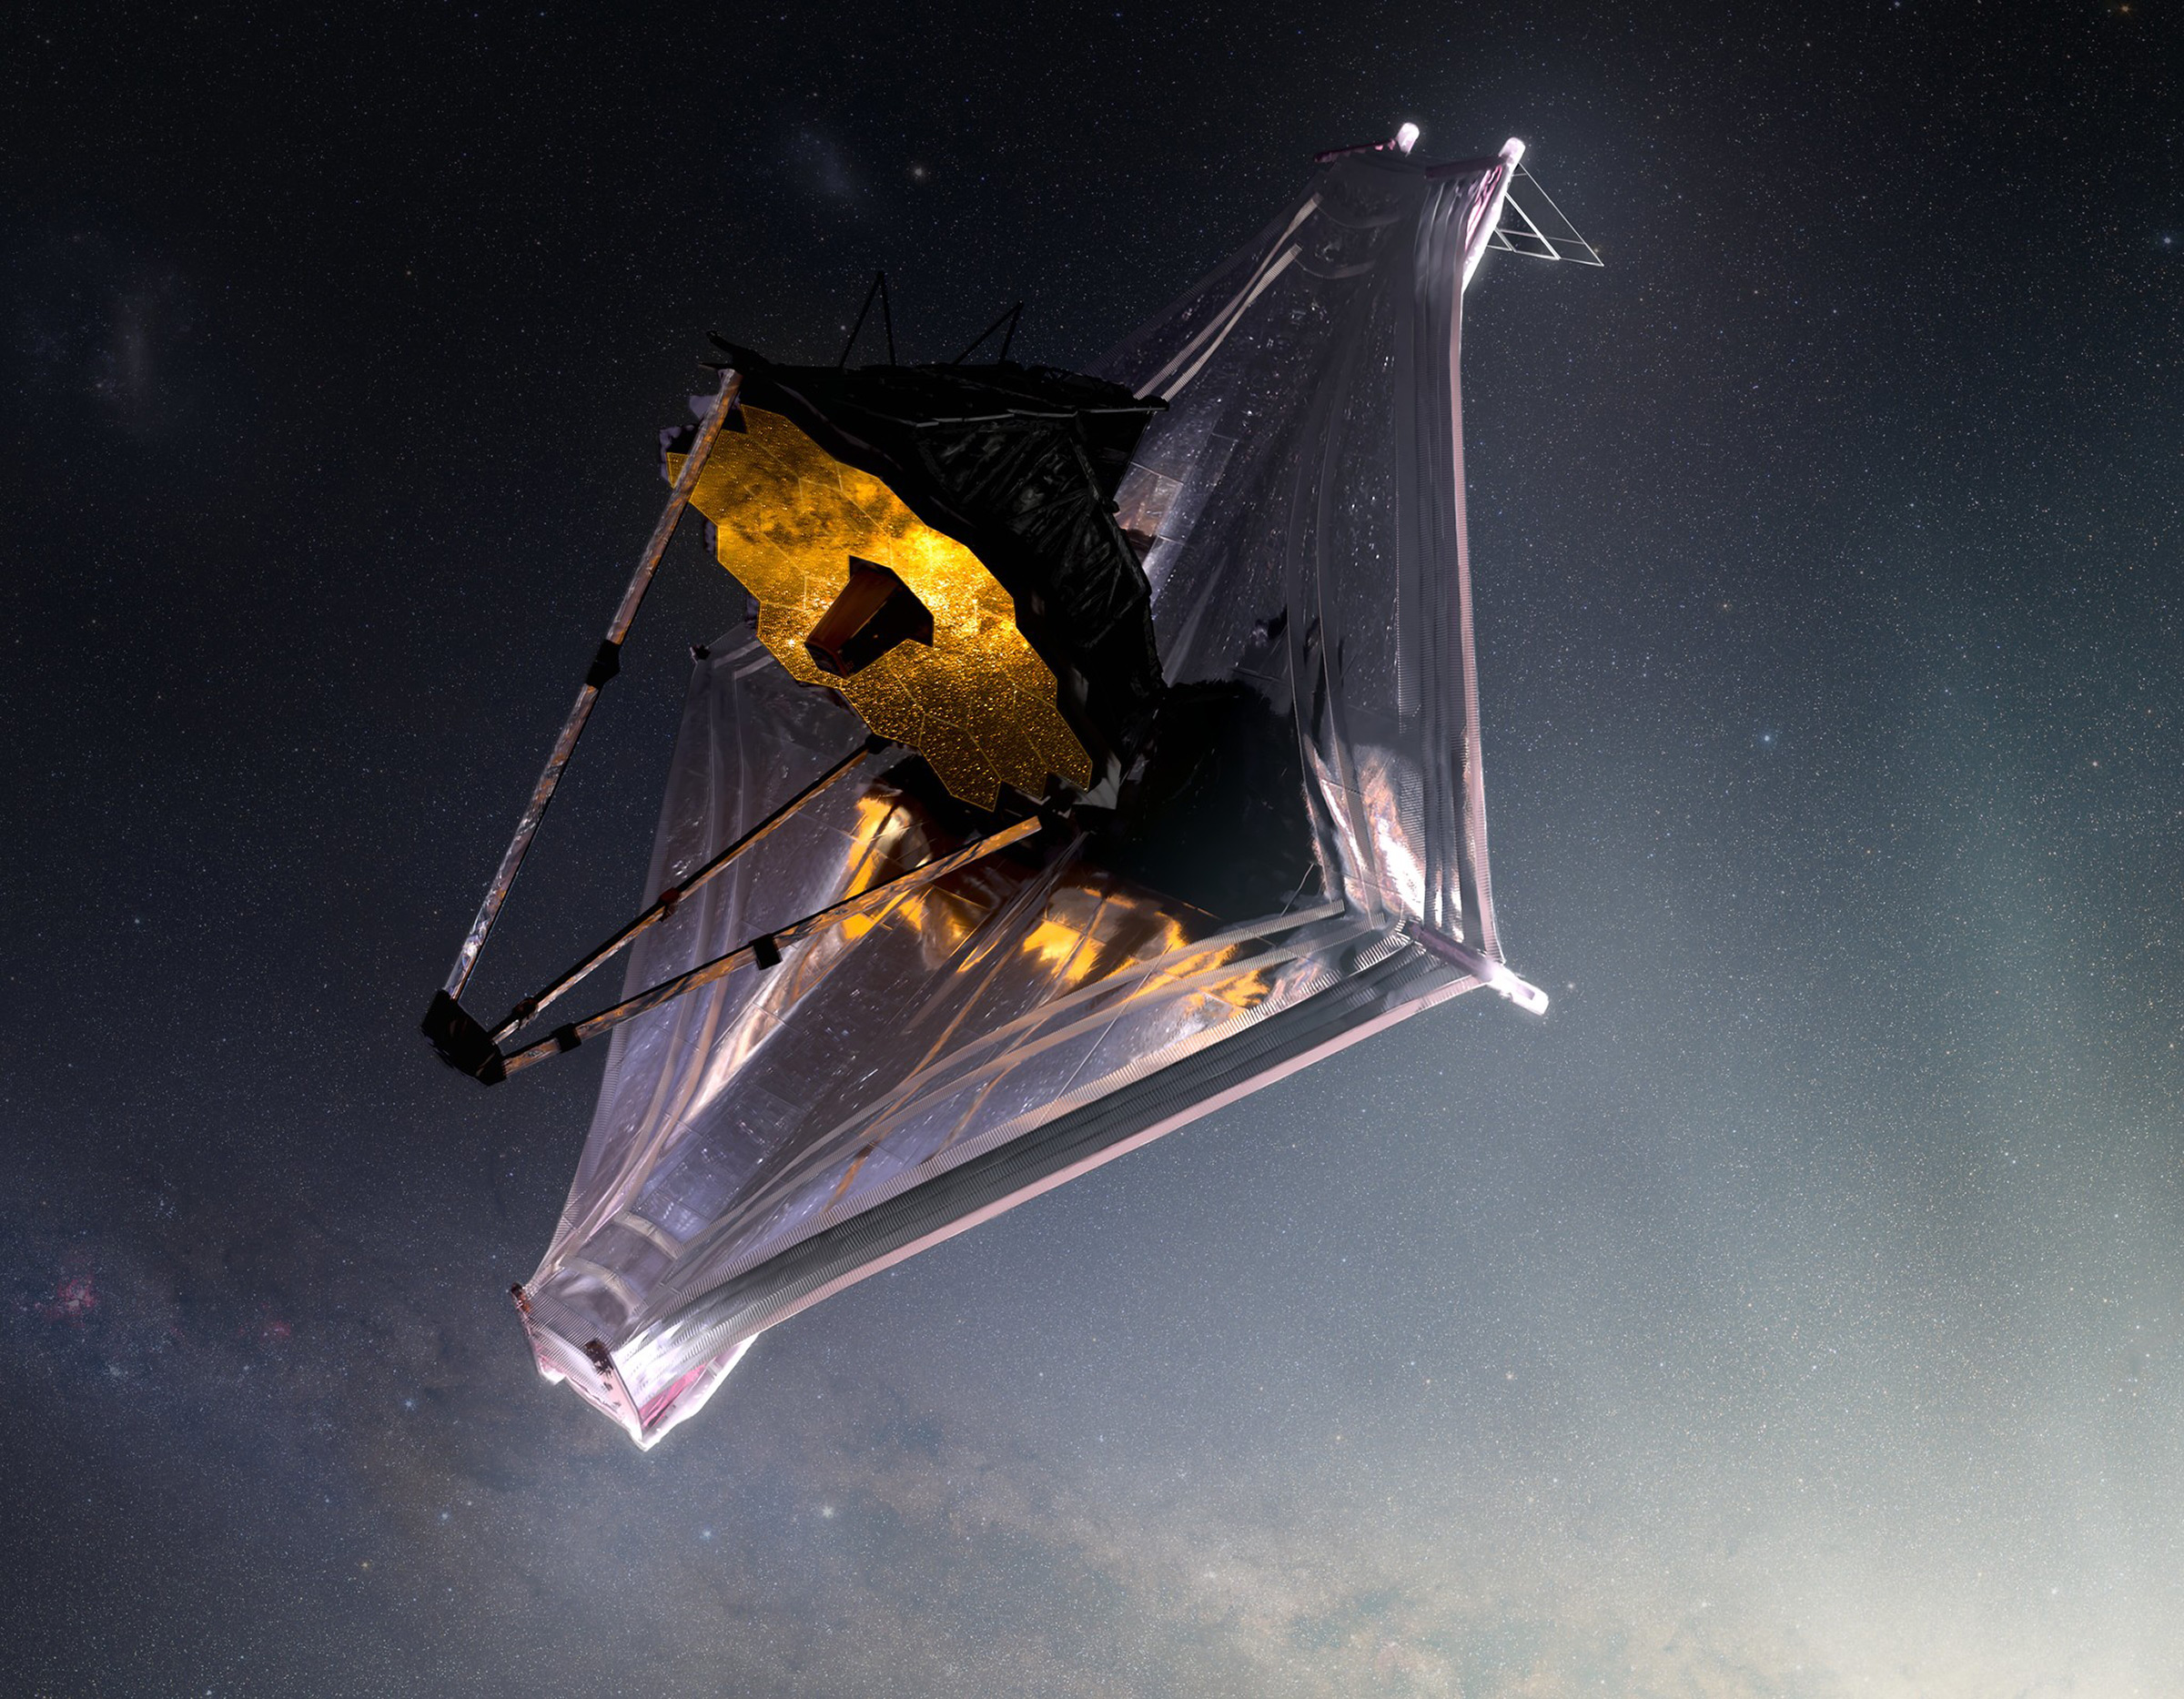 The Webb telescope depicted by an artist as it might look in space. (NASA GSFC/CIL/Adriana Manrique Gutierrez)